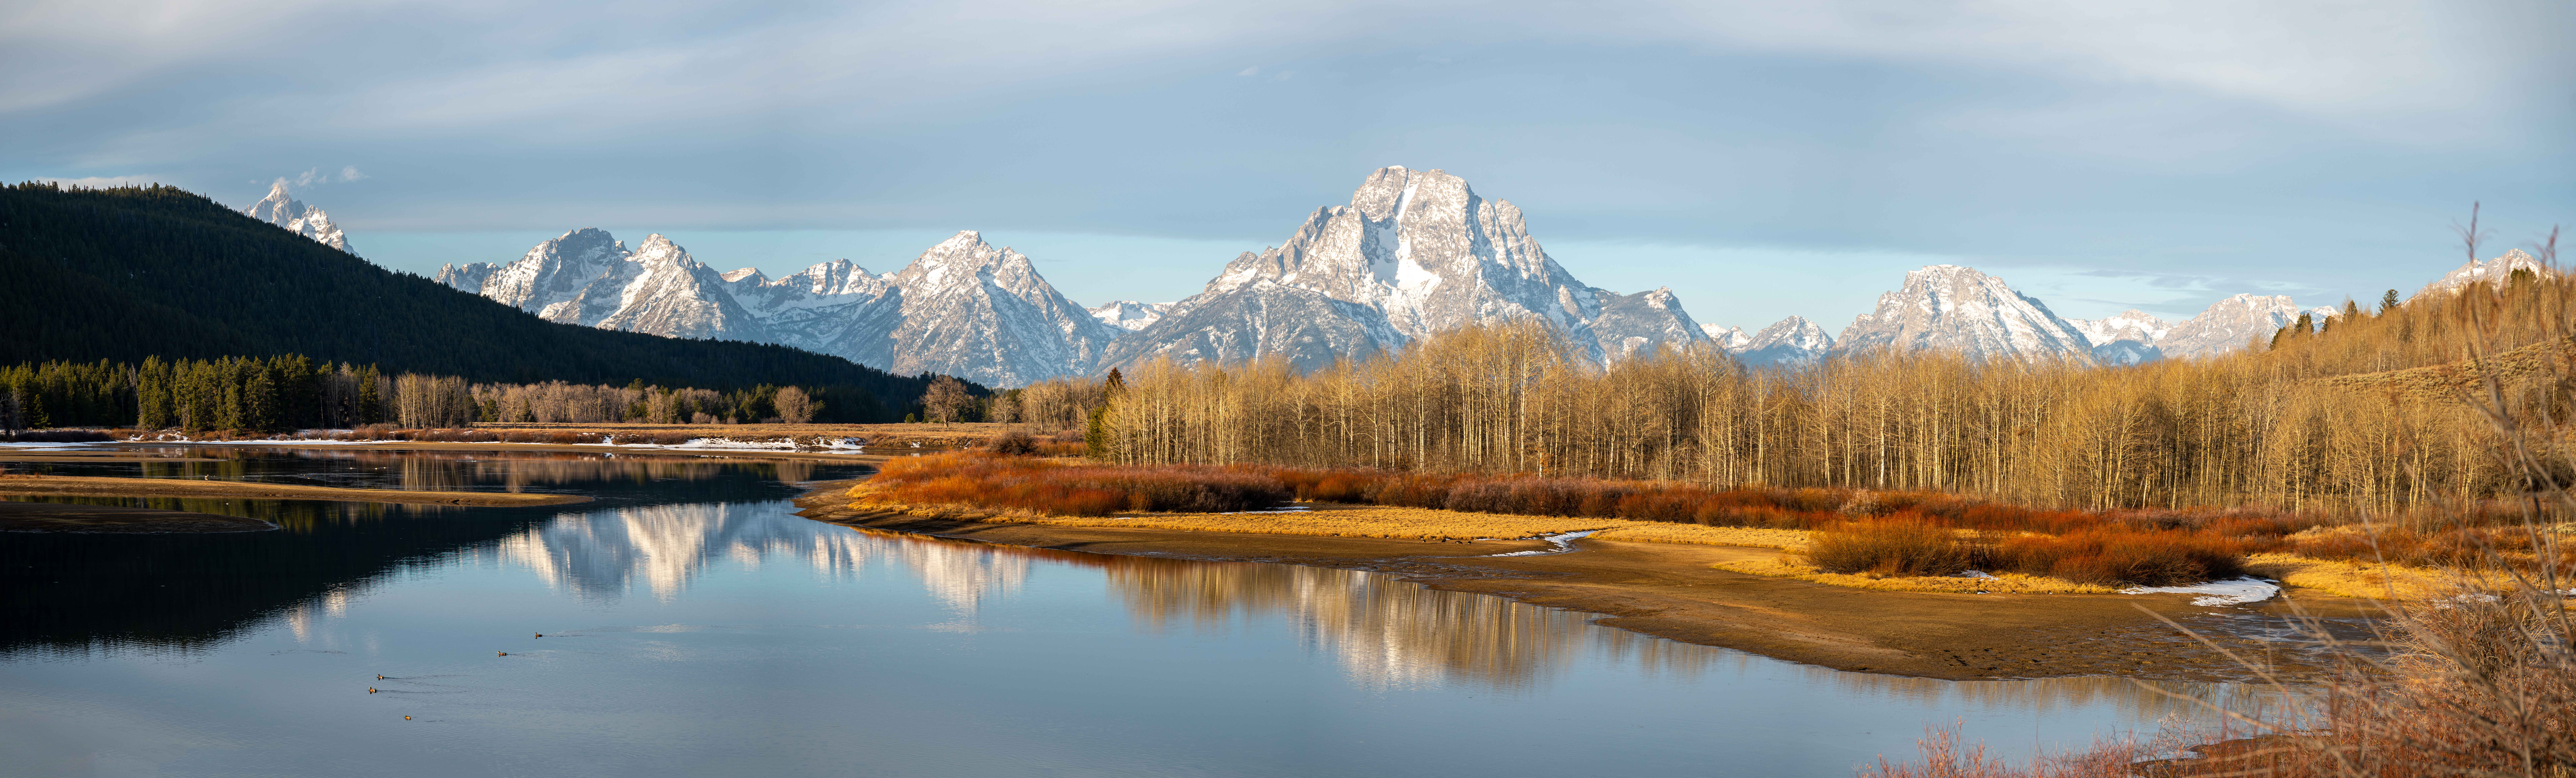 Oxbow Bend Turnout Panorama, the Teton range with the Snake River and bare aspen trees in the foreground